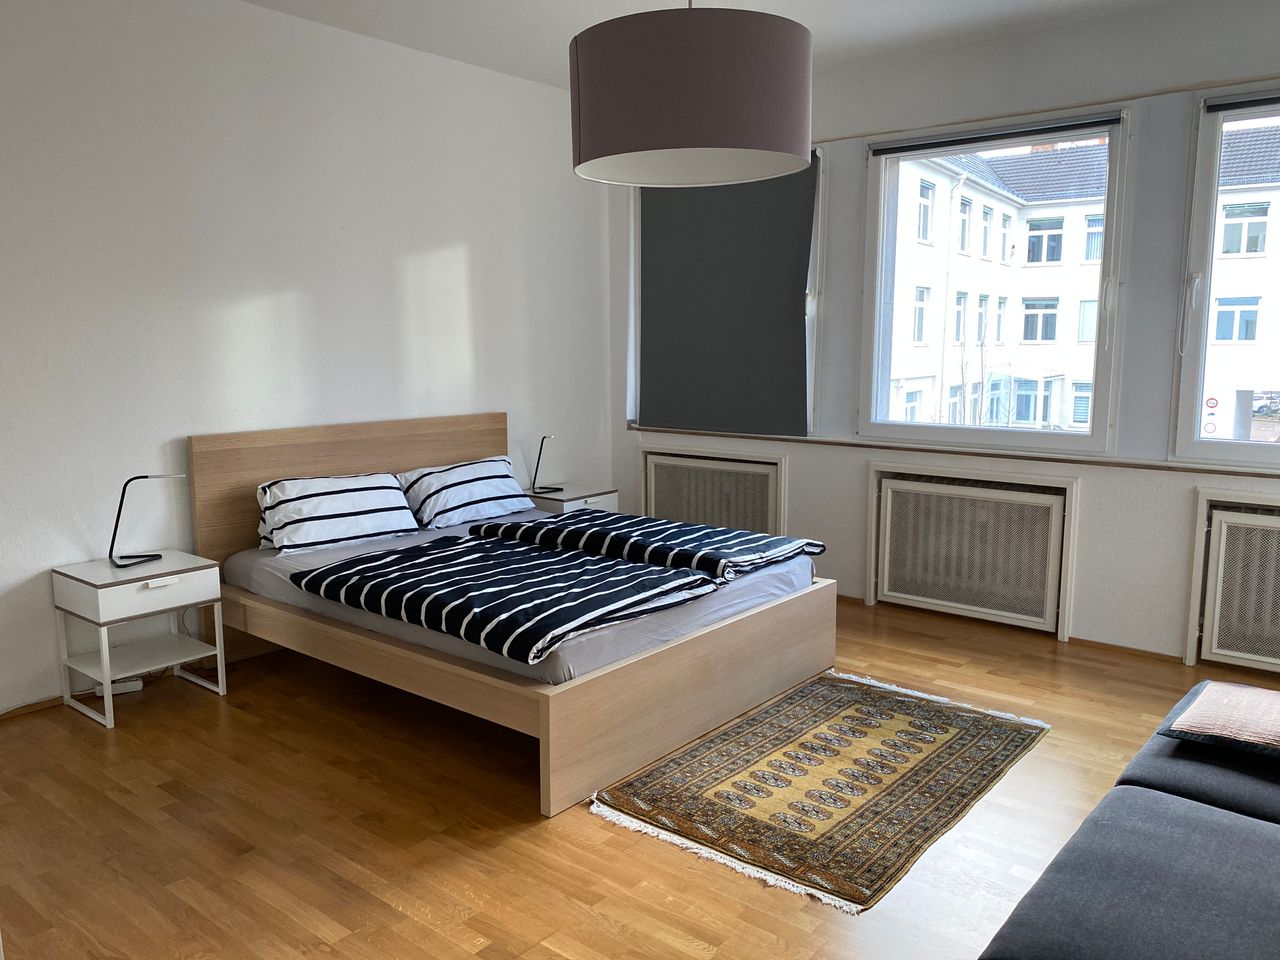 Cozy, awesome apartment located in Köln with large balcony